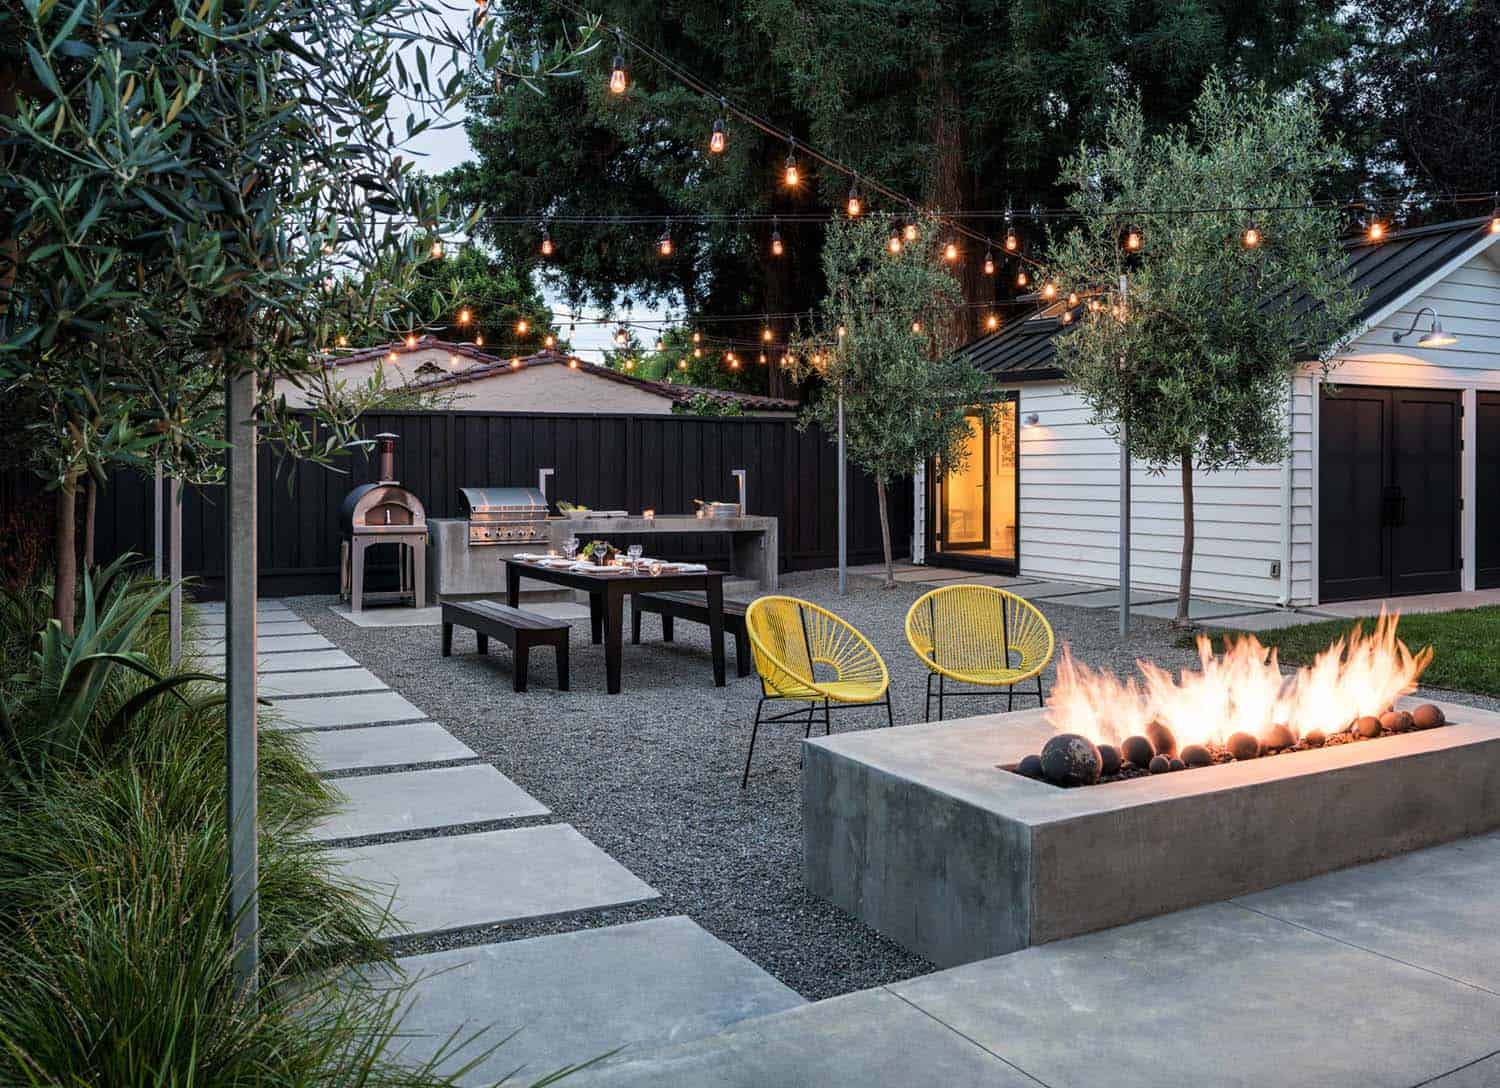 28 Inspiring Fire Pit Ideas To Create A, Outdoor Gas Fire Pit Designs